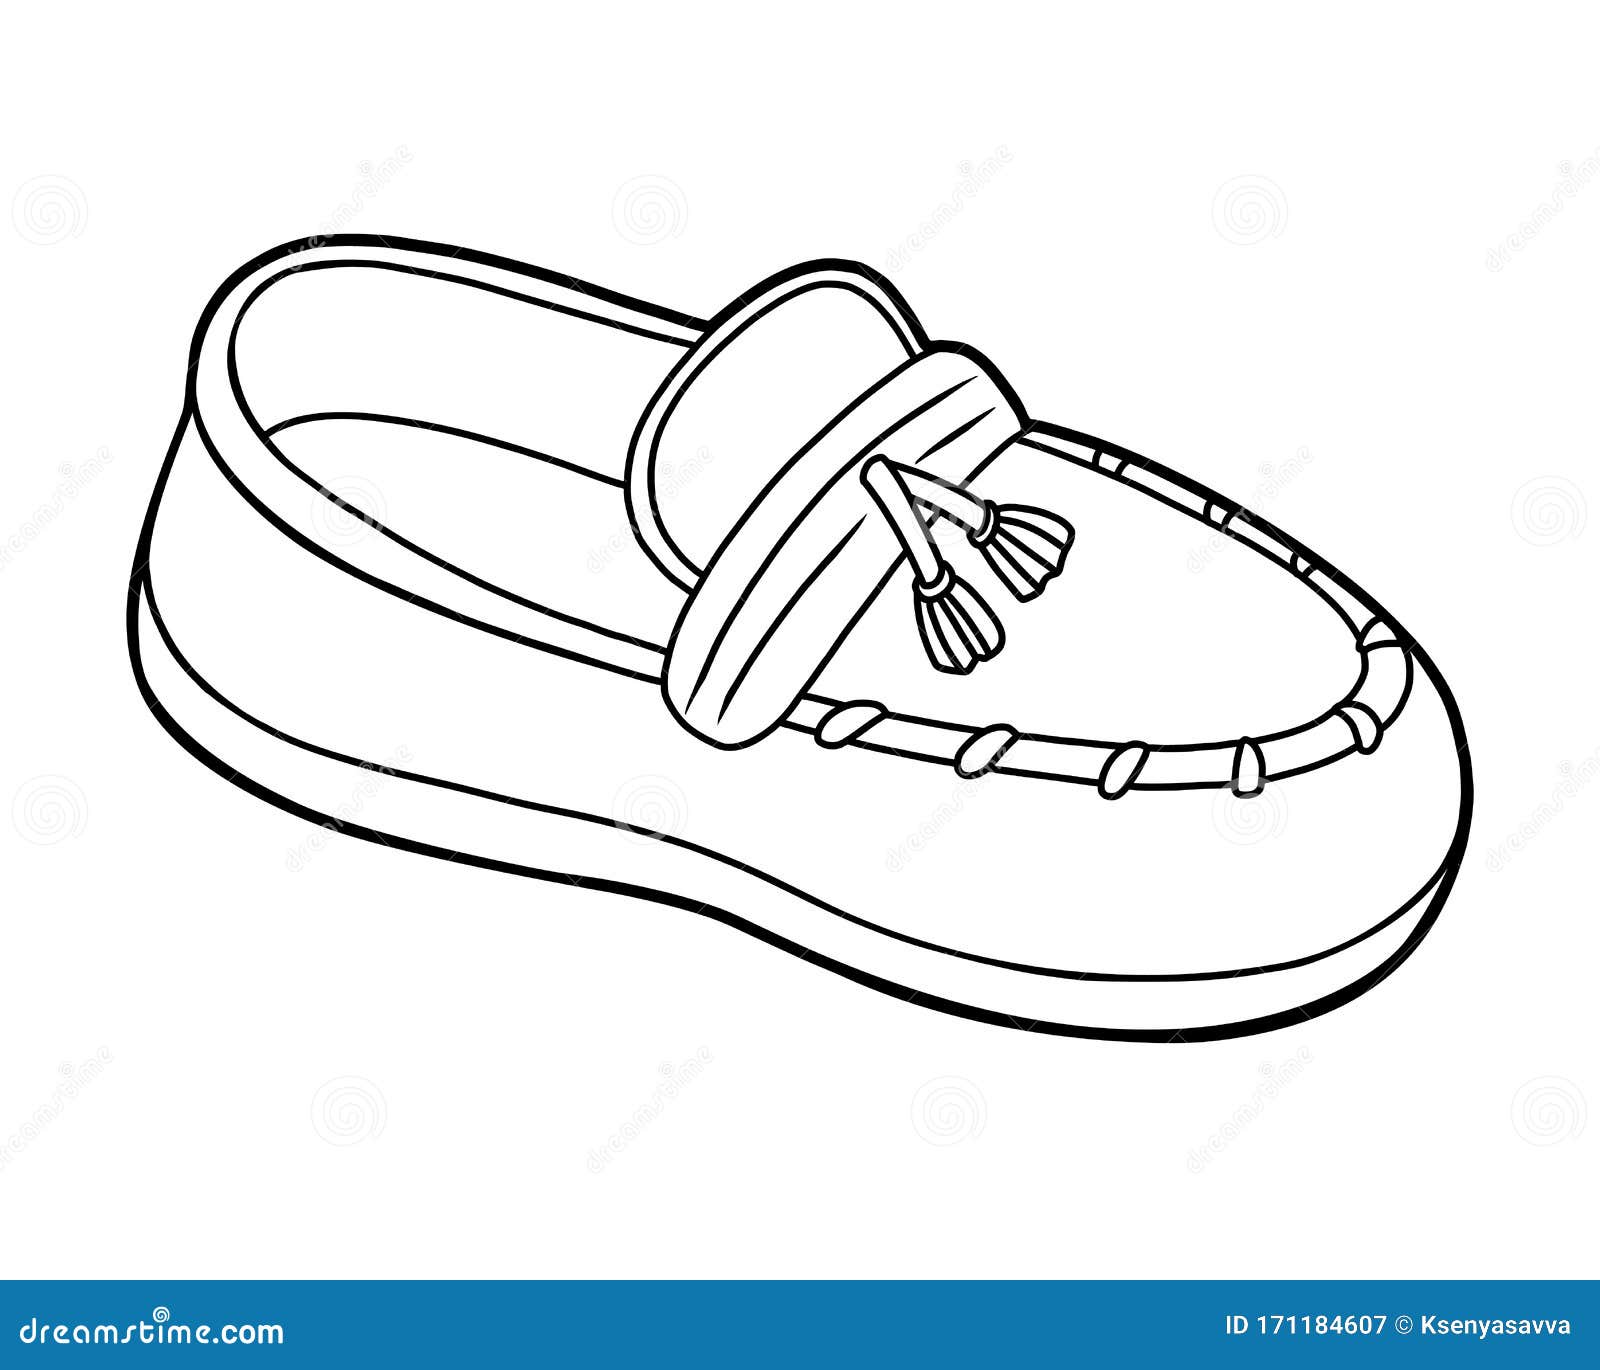 Download Coloring Book, Cartoon Shoe Collection. Moccasin Stock ...